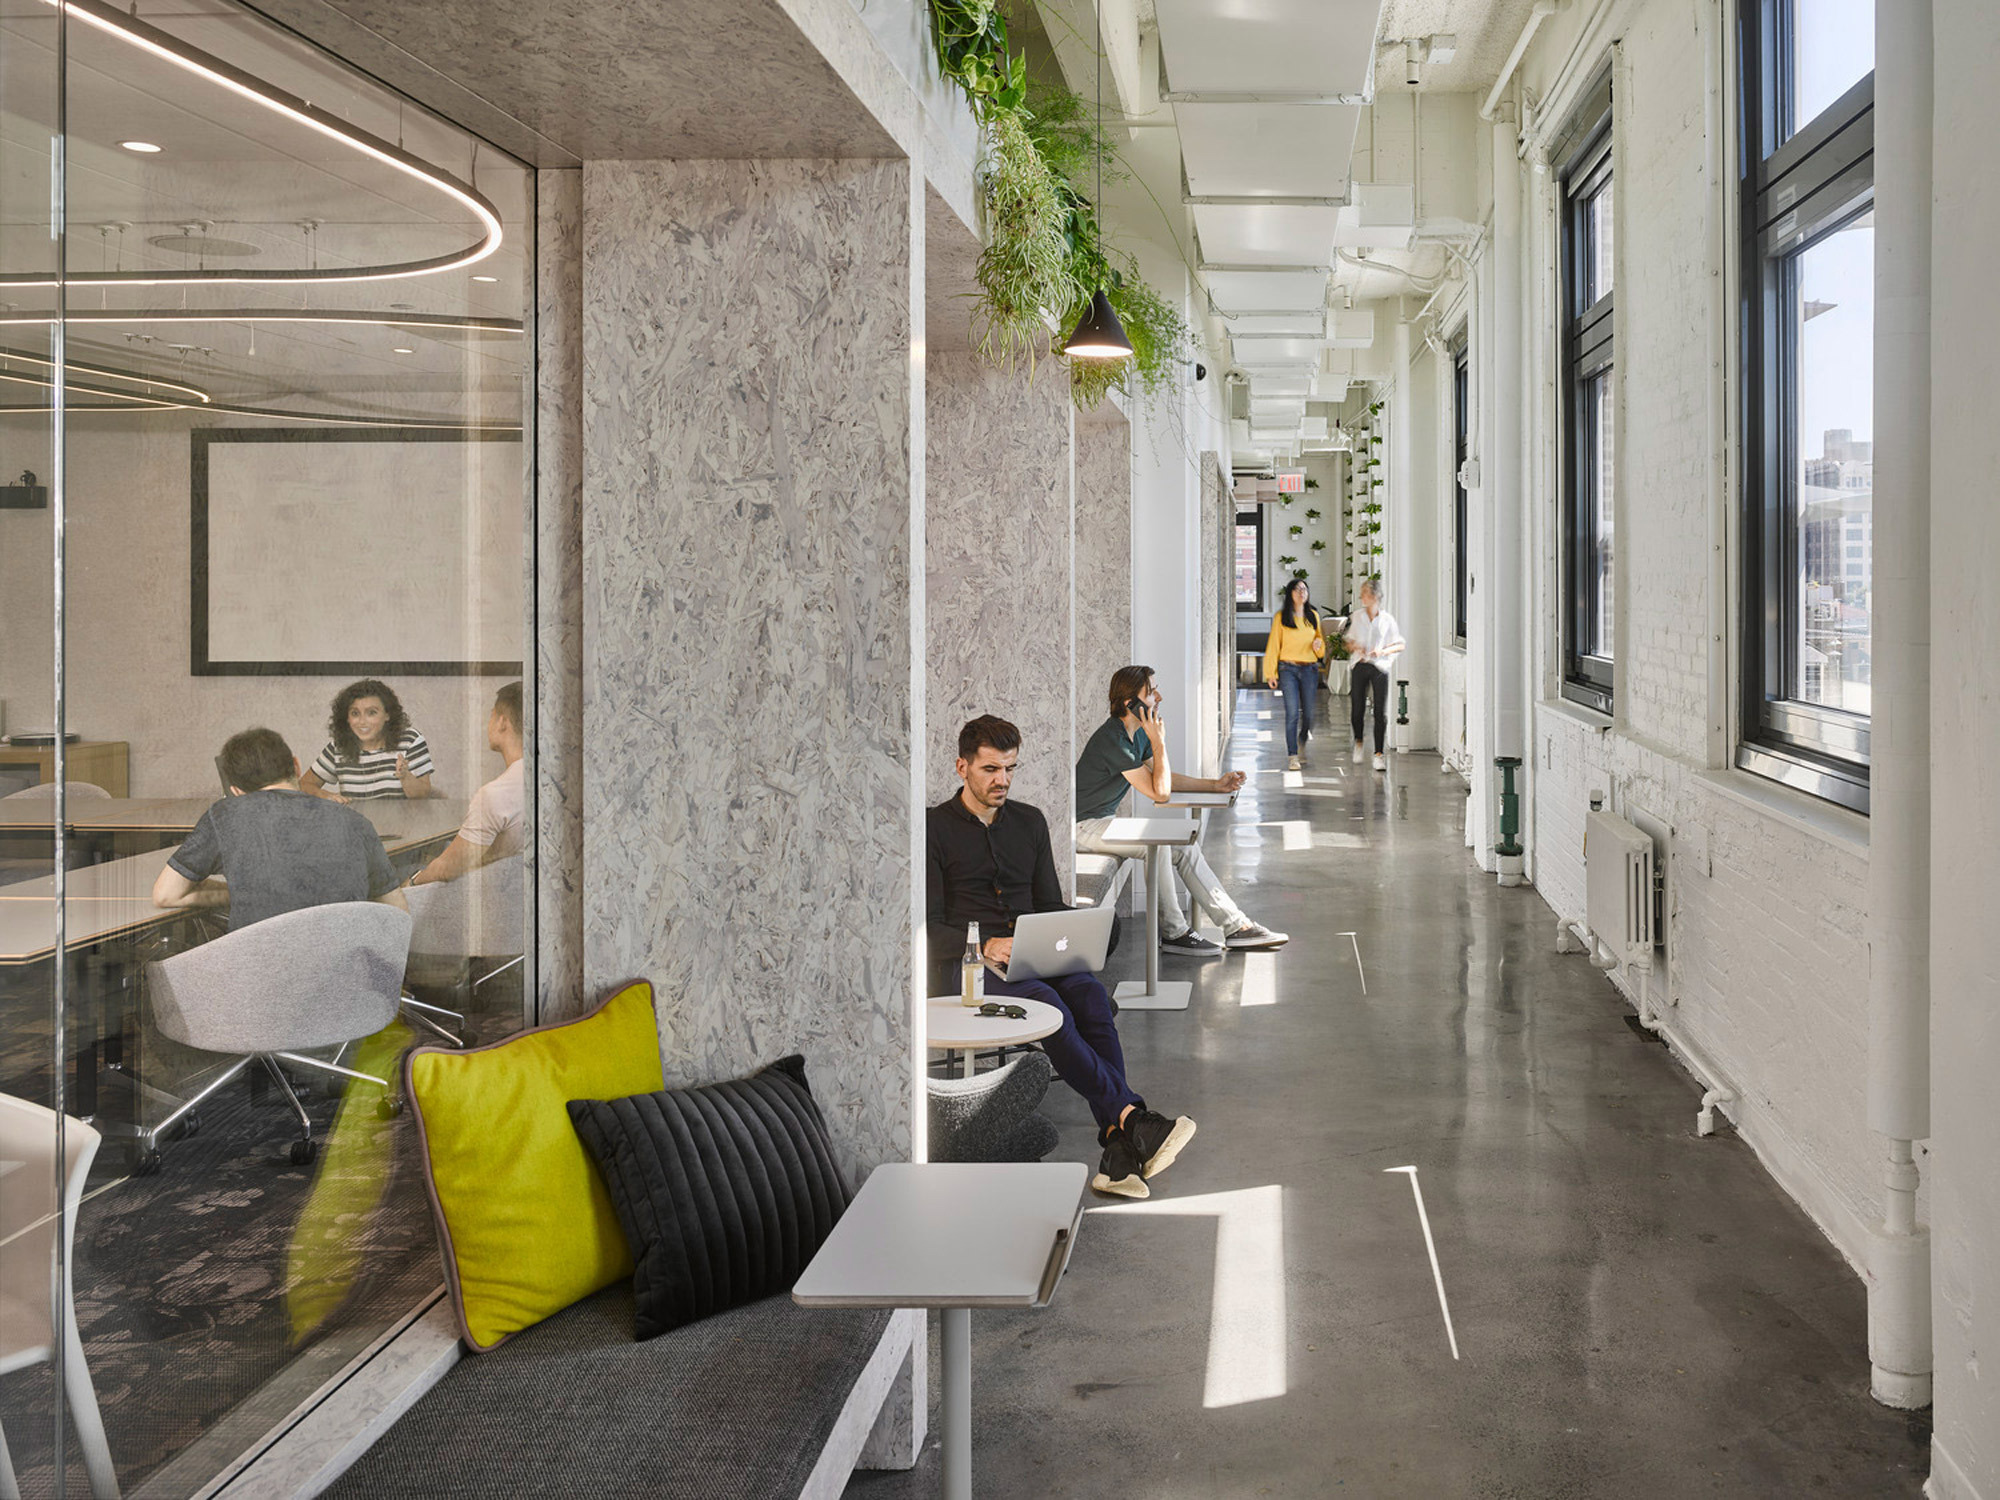 Modern office space blending natural light with greenery. Features a minimalist desk setup against marble walls, with employees working in communal zones that foster collaboration. Transparent partitions enhance openness, while plants add a biophilic touch to the sleek, contemporary environment.